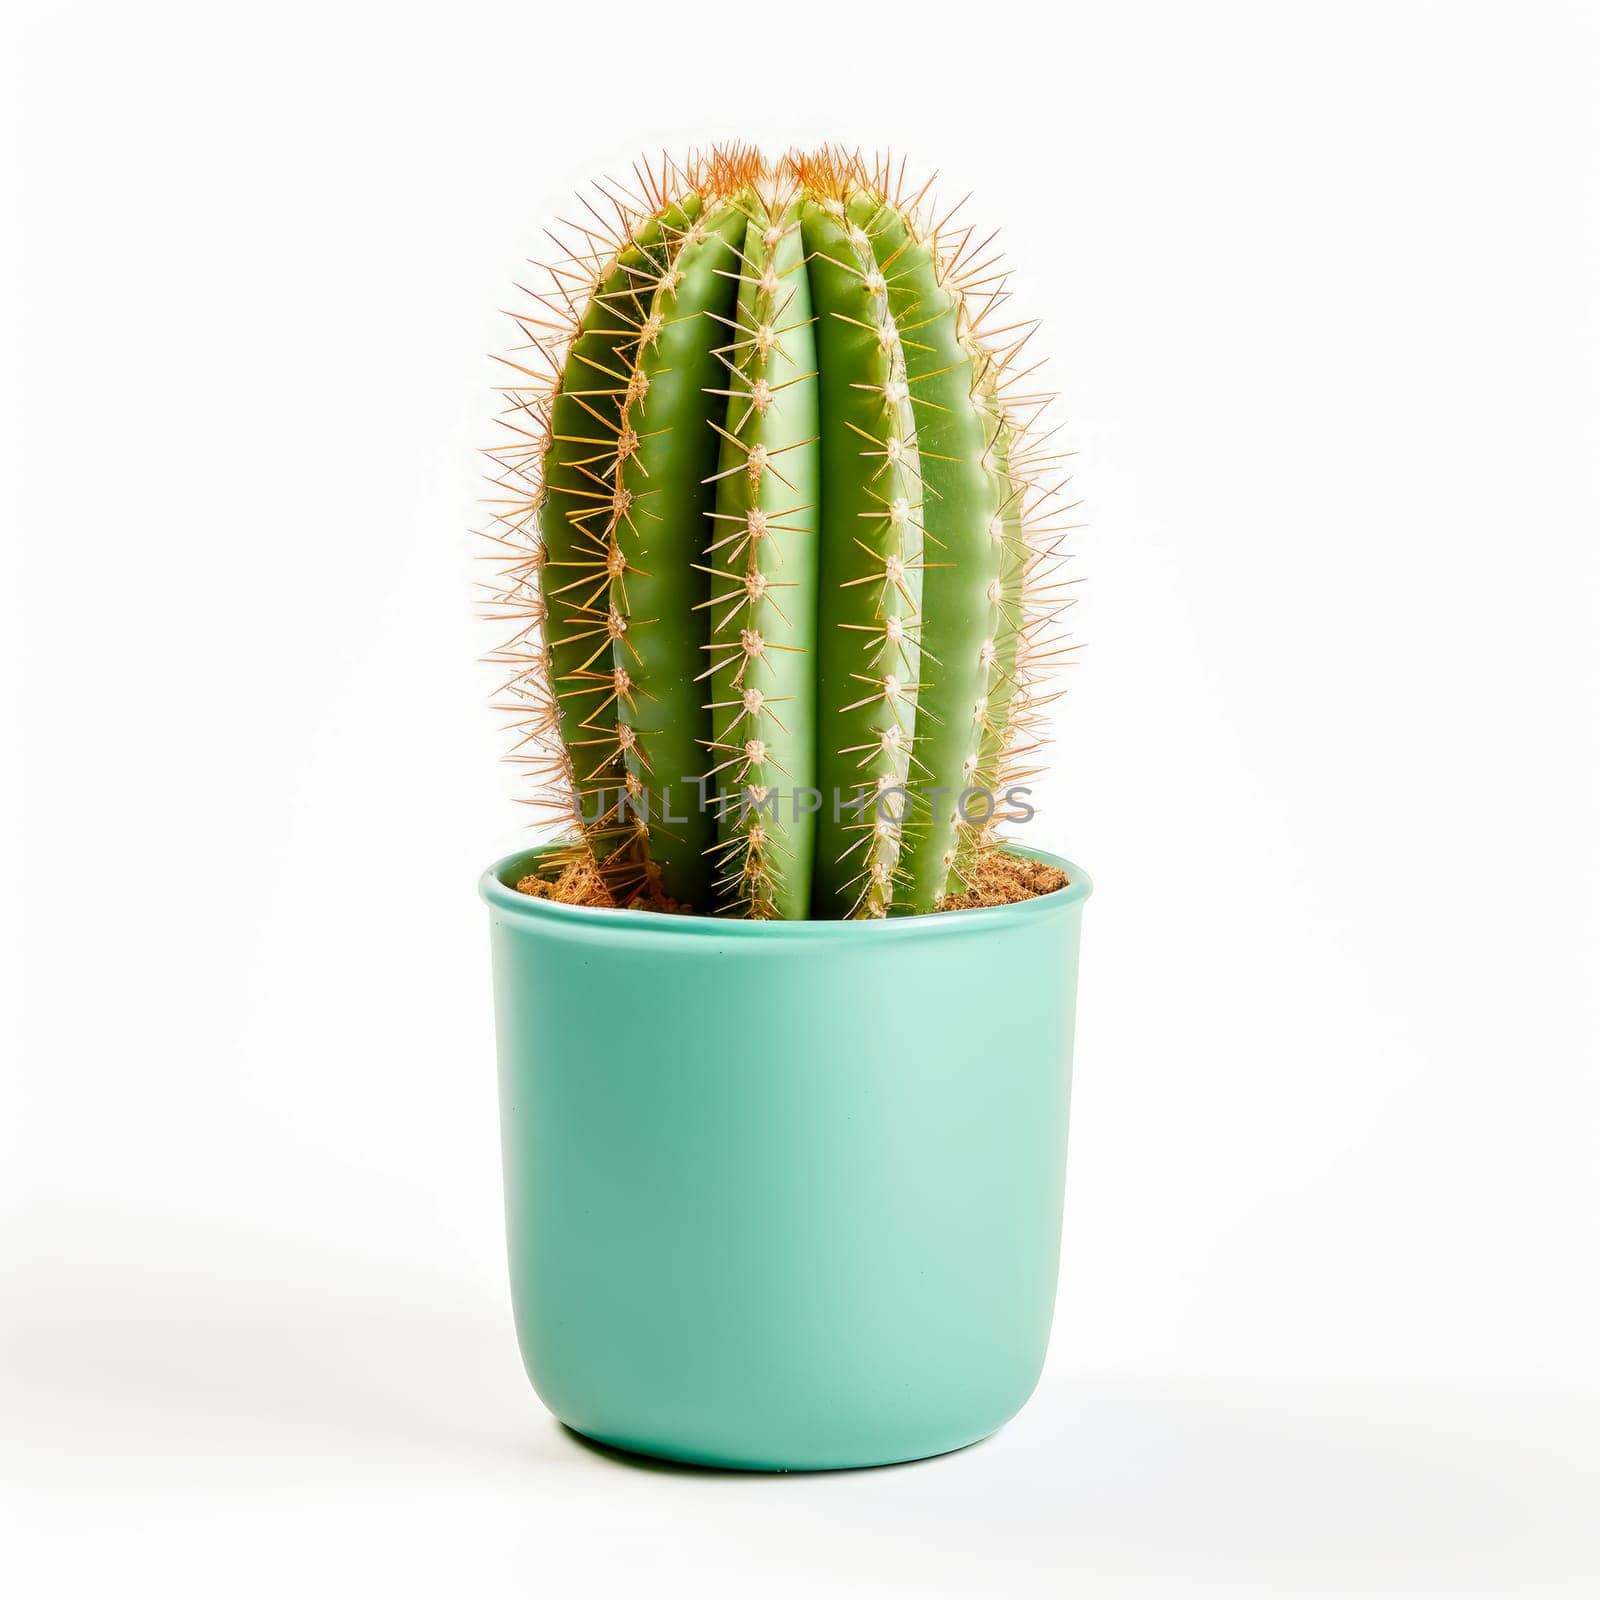 green small cactus in a pot isolated on a white background